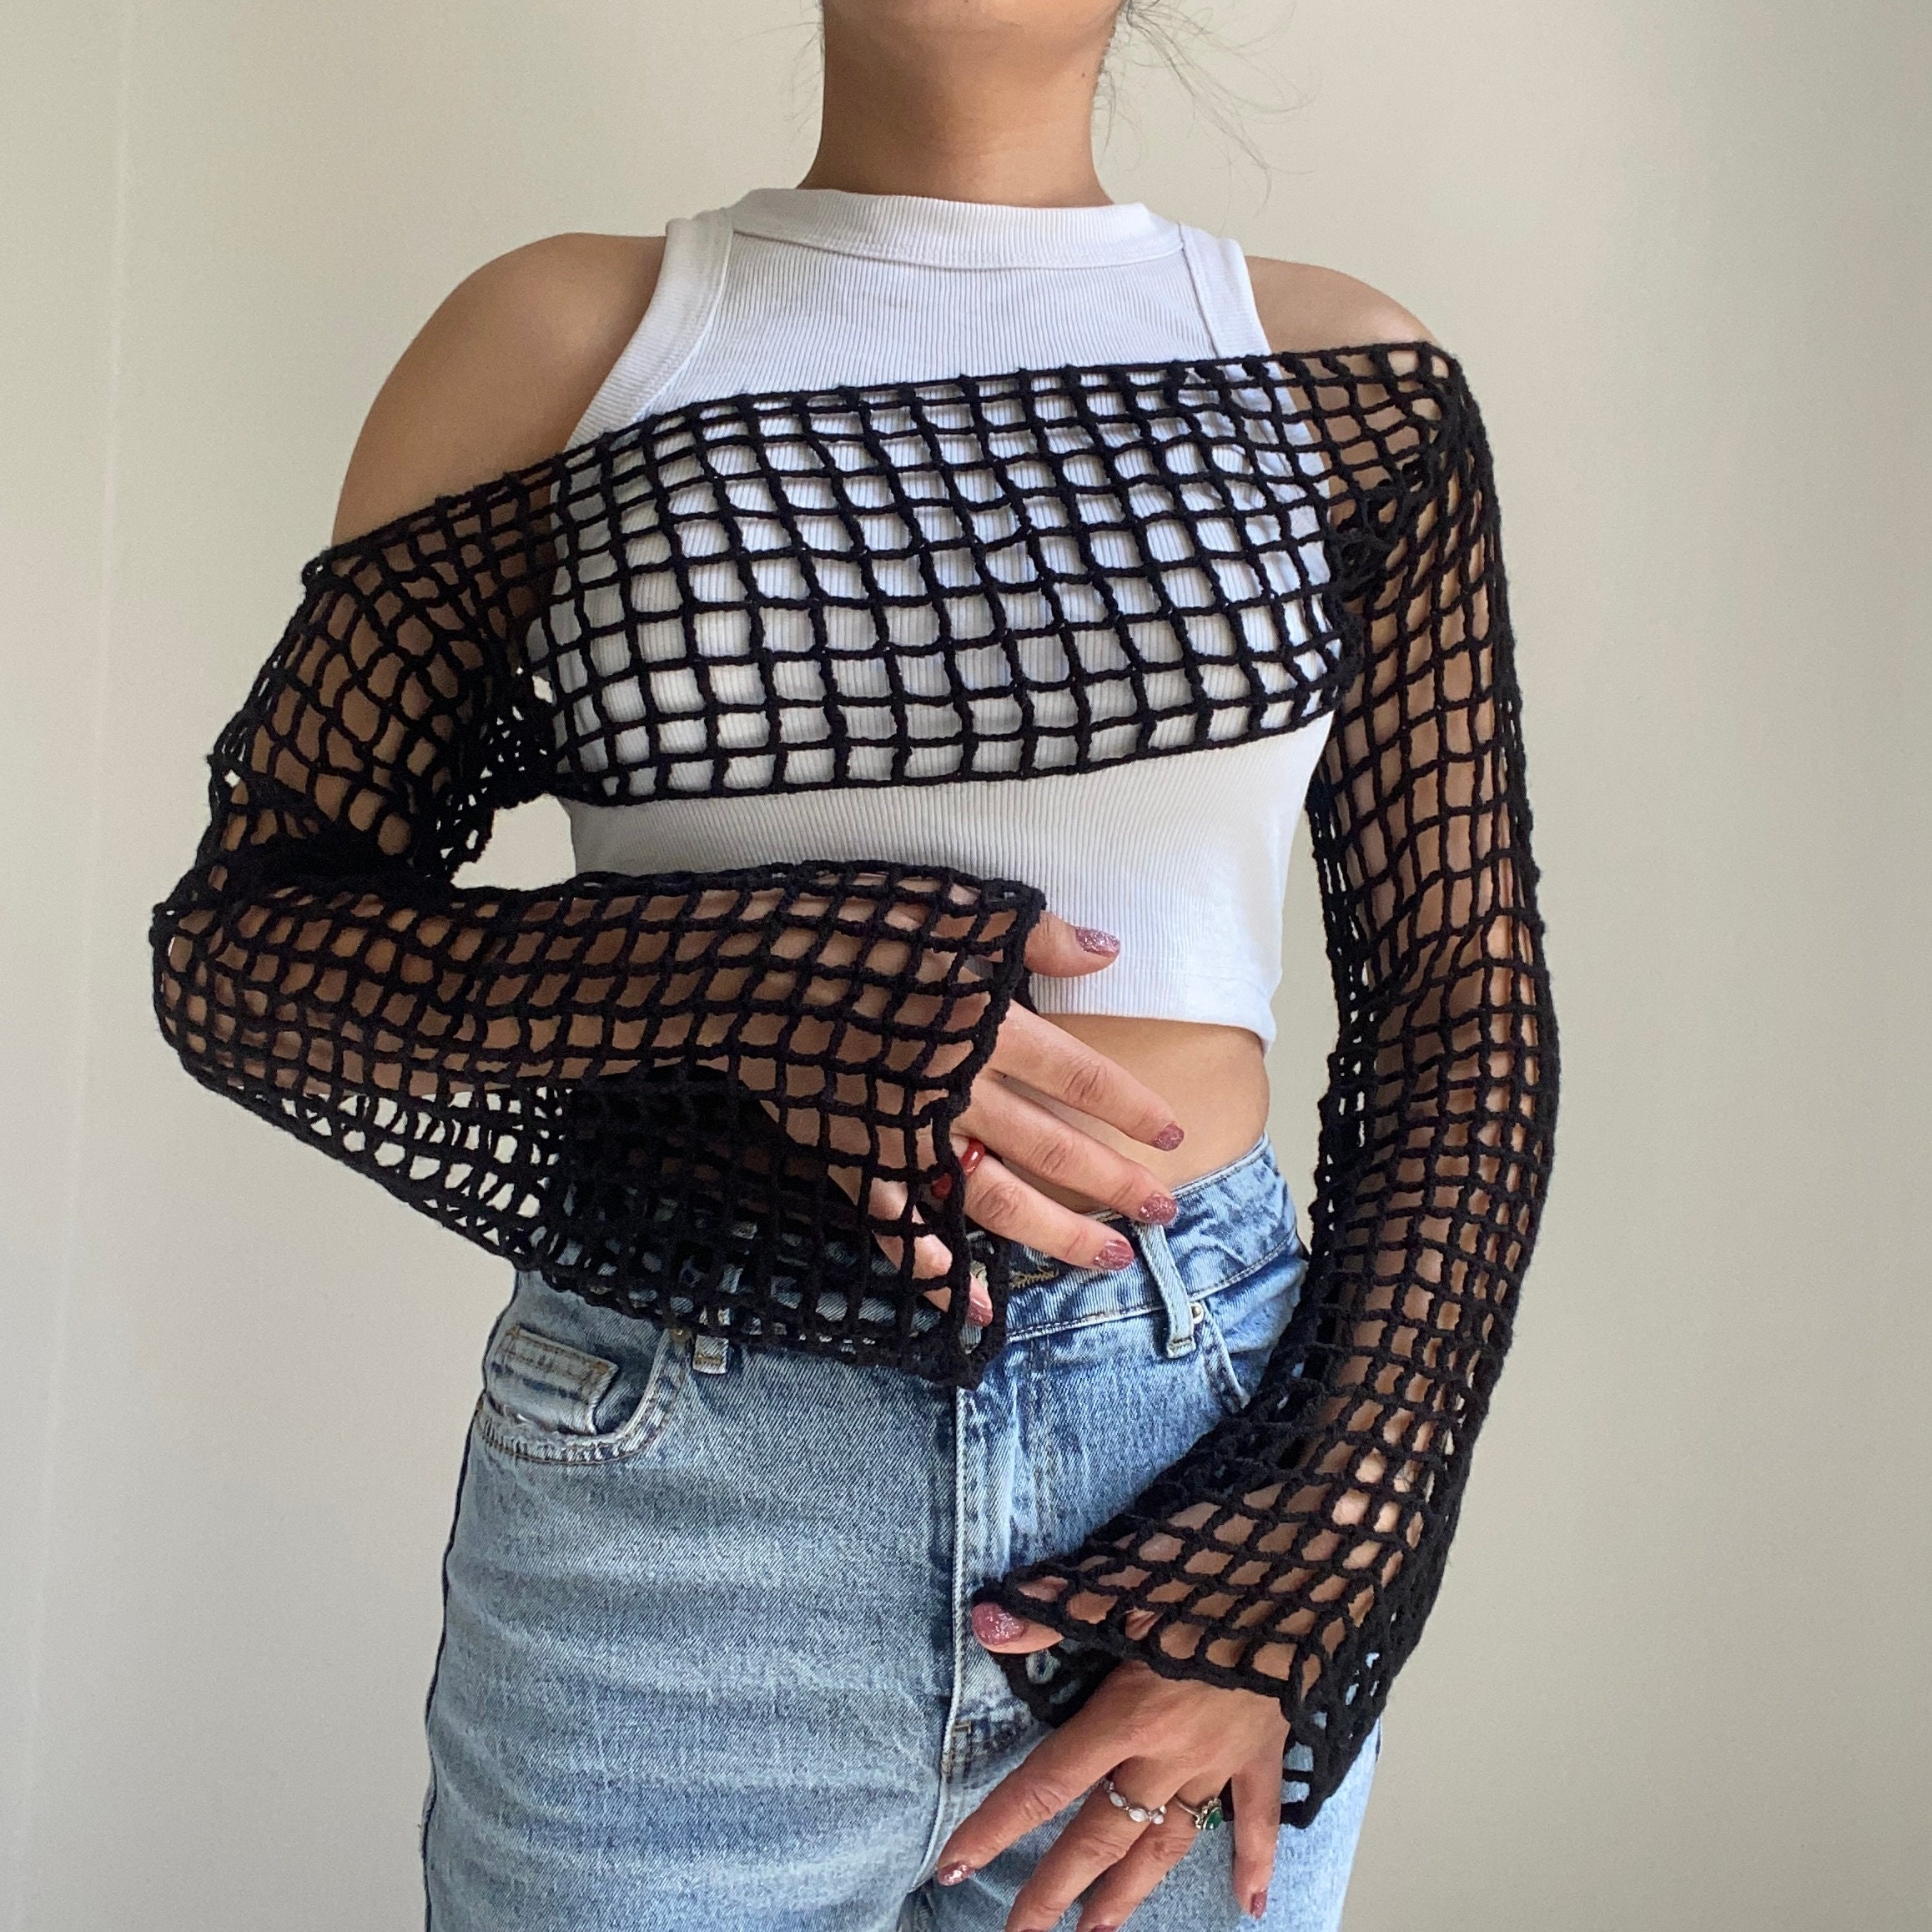 Womens Long Sleeve Fashion Crop Top Fishnet Crochet Solid Color